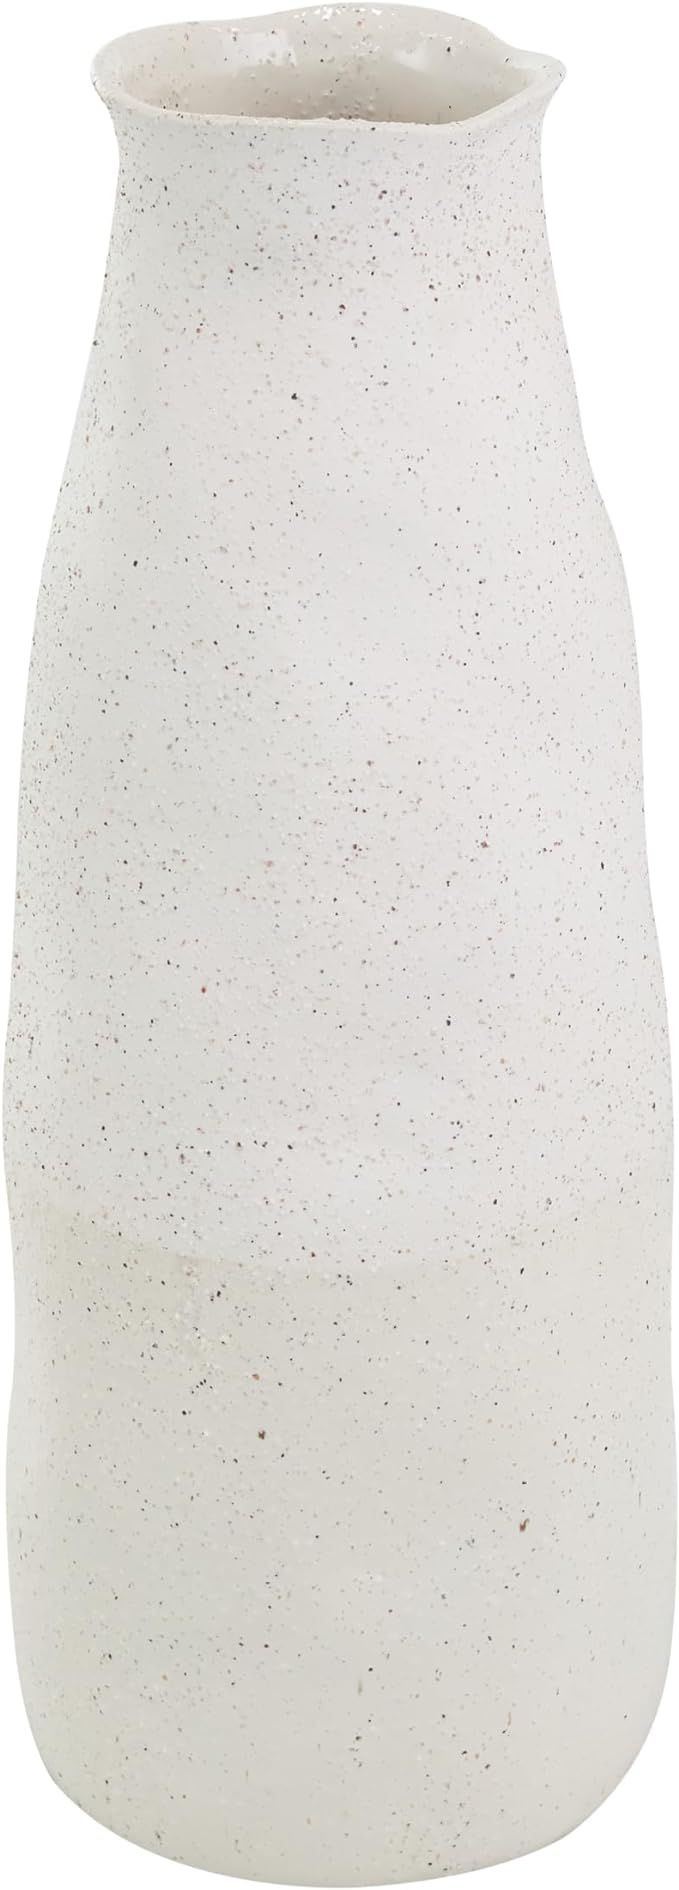 Deco 79 Ceramic Decorative Vase Abstract Wavy Centerpiece Vase with Textured Speckled Detailing, ... | Amazon (US)